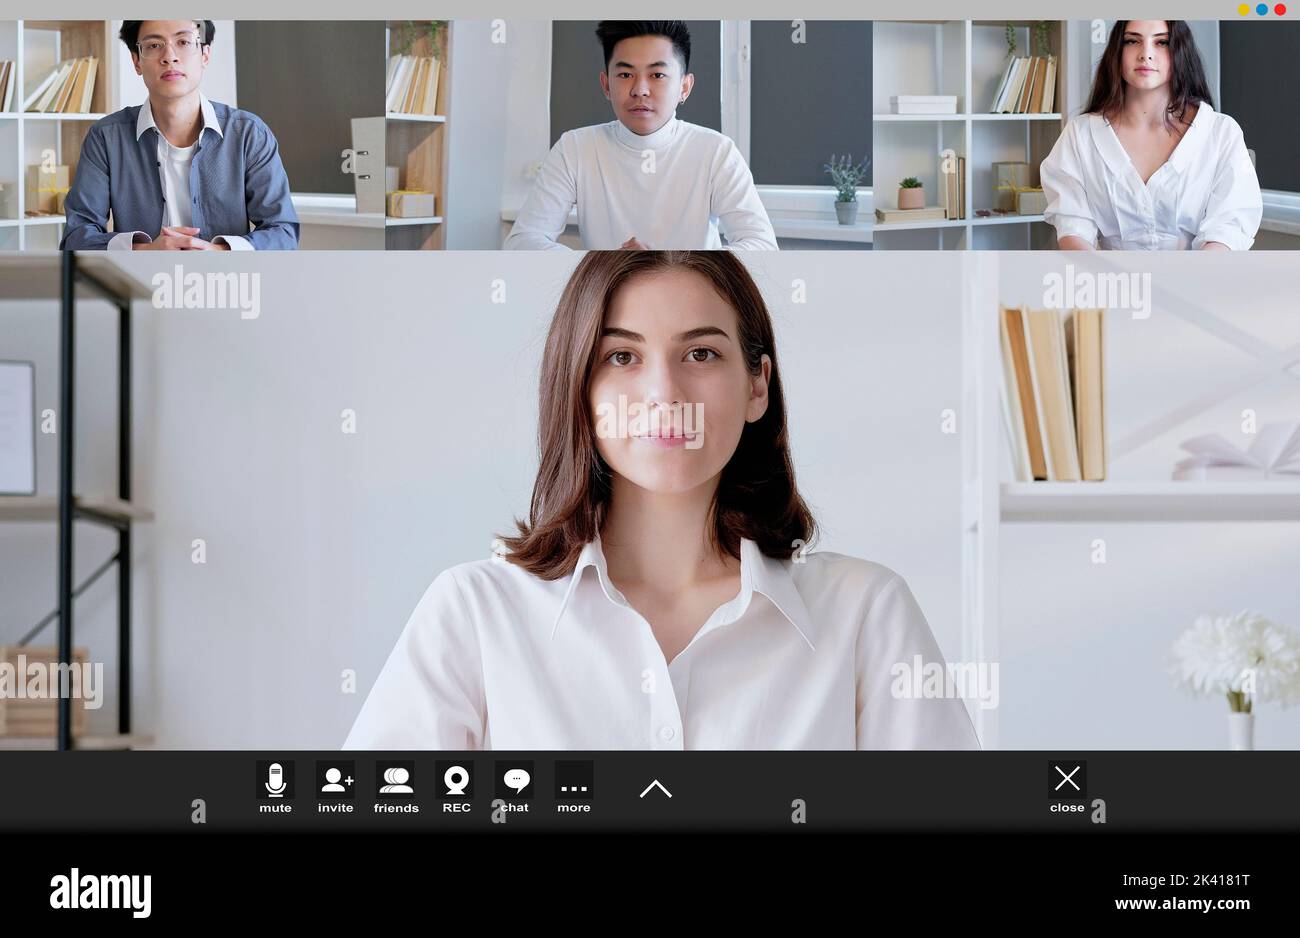 Virtual meeting. Webinar view. Screen mockup. Female coach having online conference with two men and woman in light room interior. Stock Photo